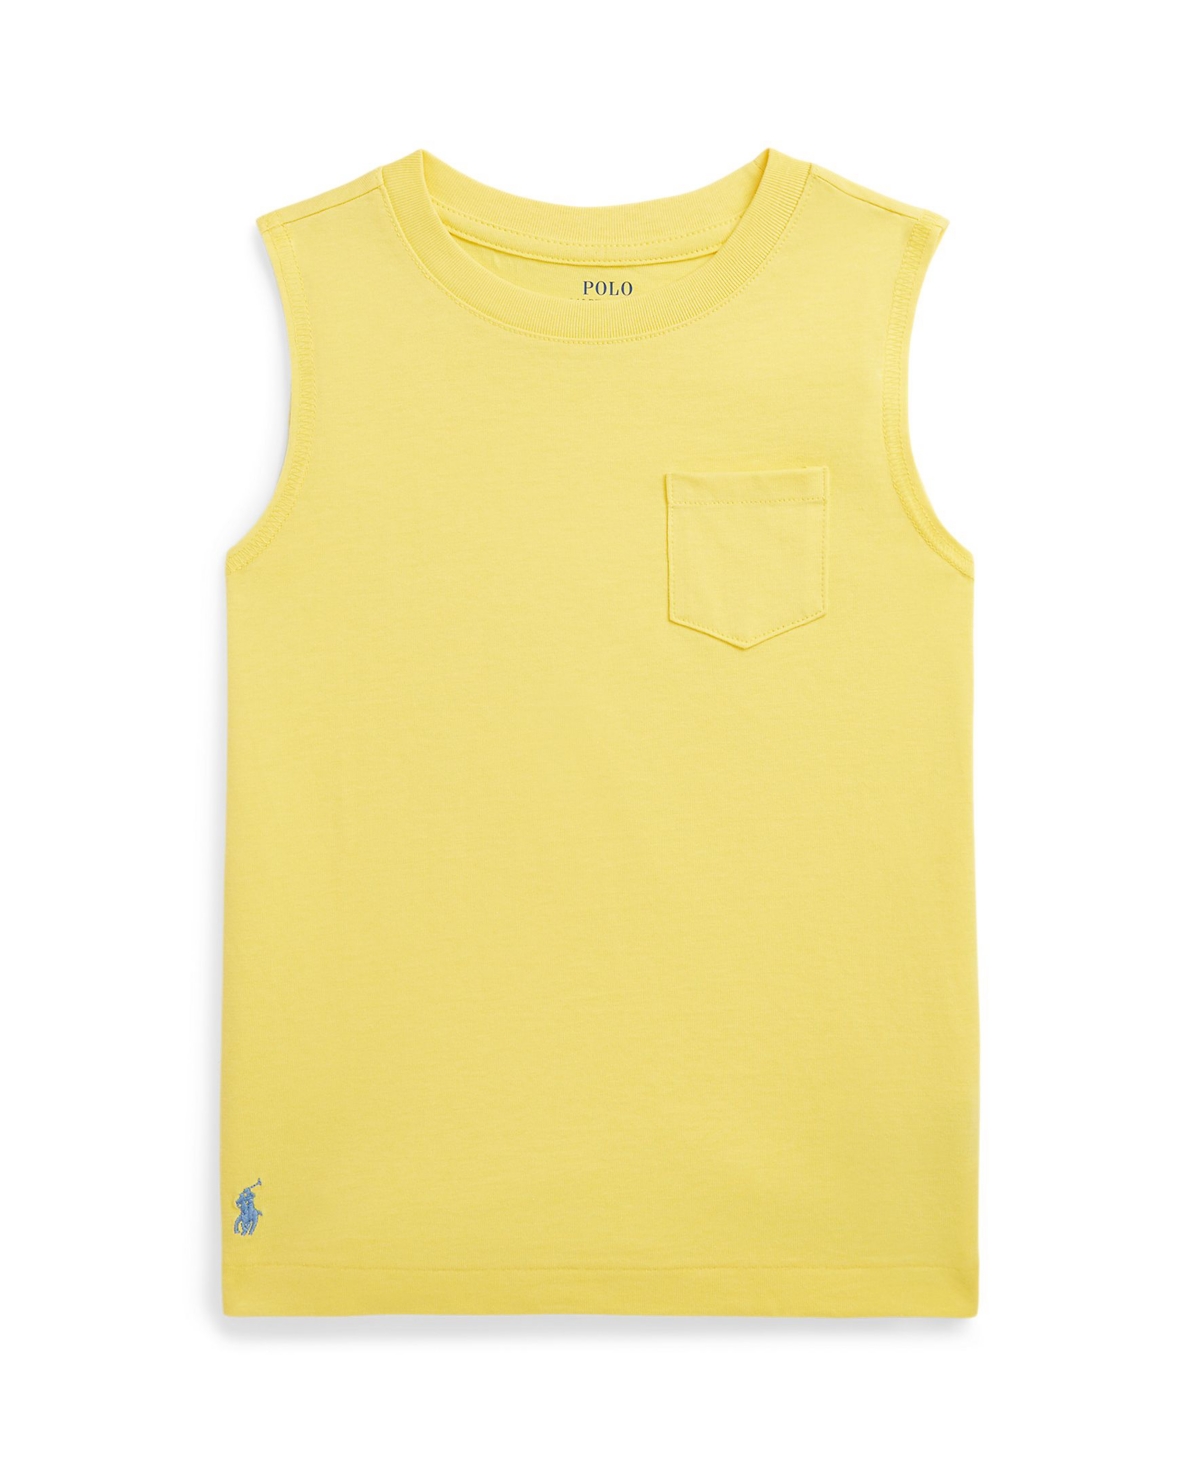 Polo Ralph Lauren Kids' Toddler And Little Boys Cotton Jersey Pocket Tank T-shirt In Oasis Yellow,c